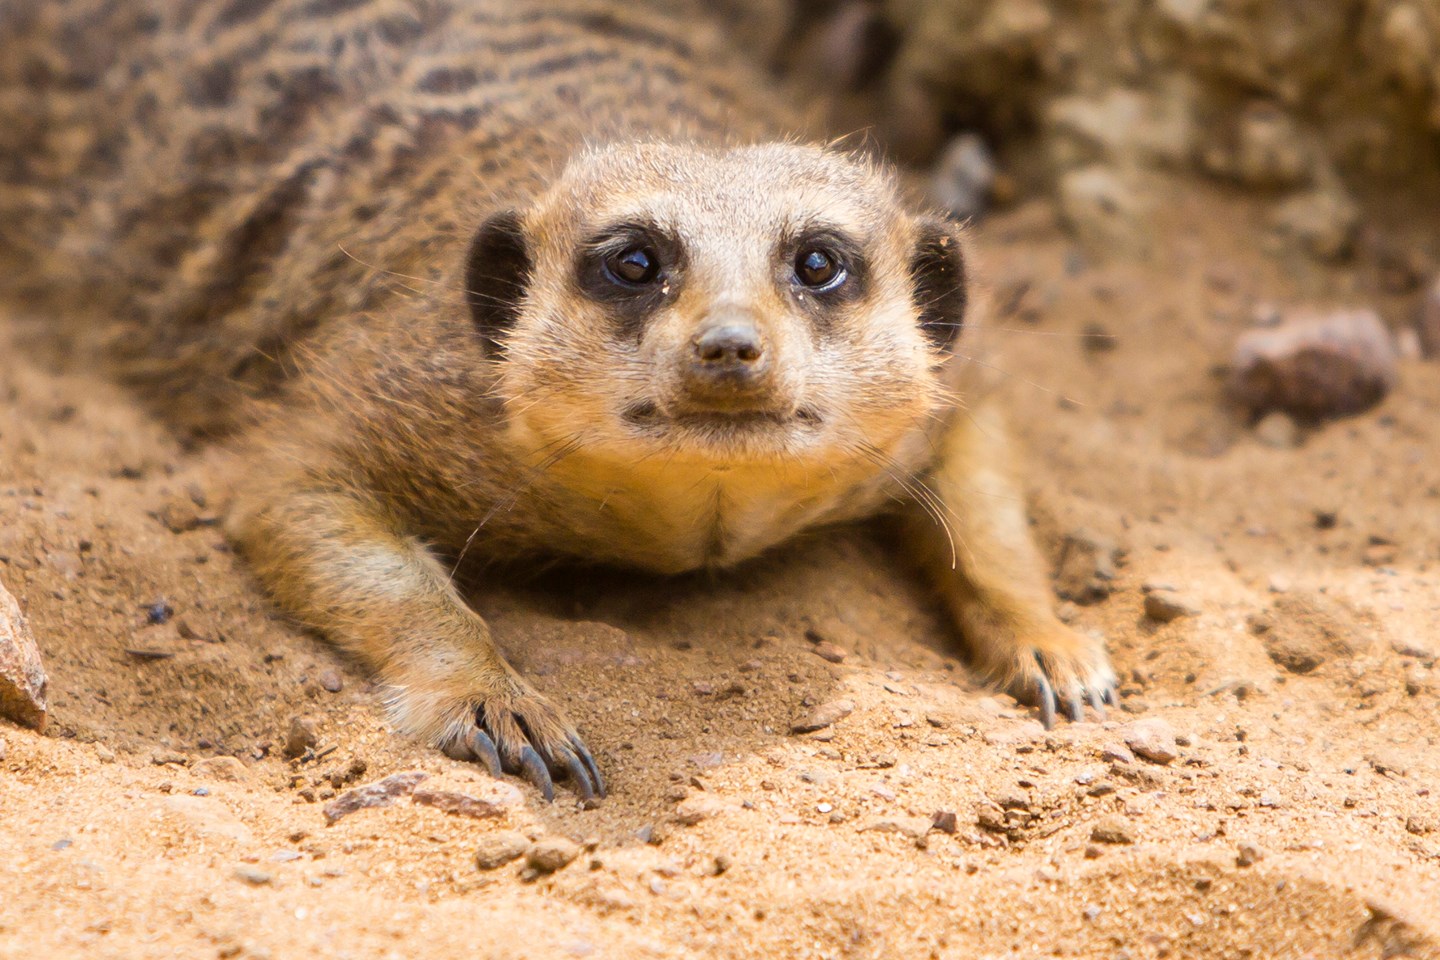 Meerkat looks up from laying down in sandy enclosure 